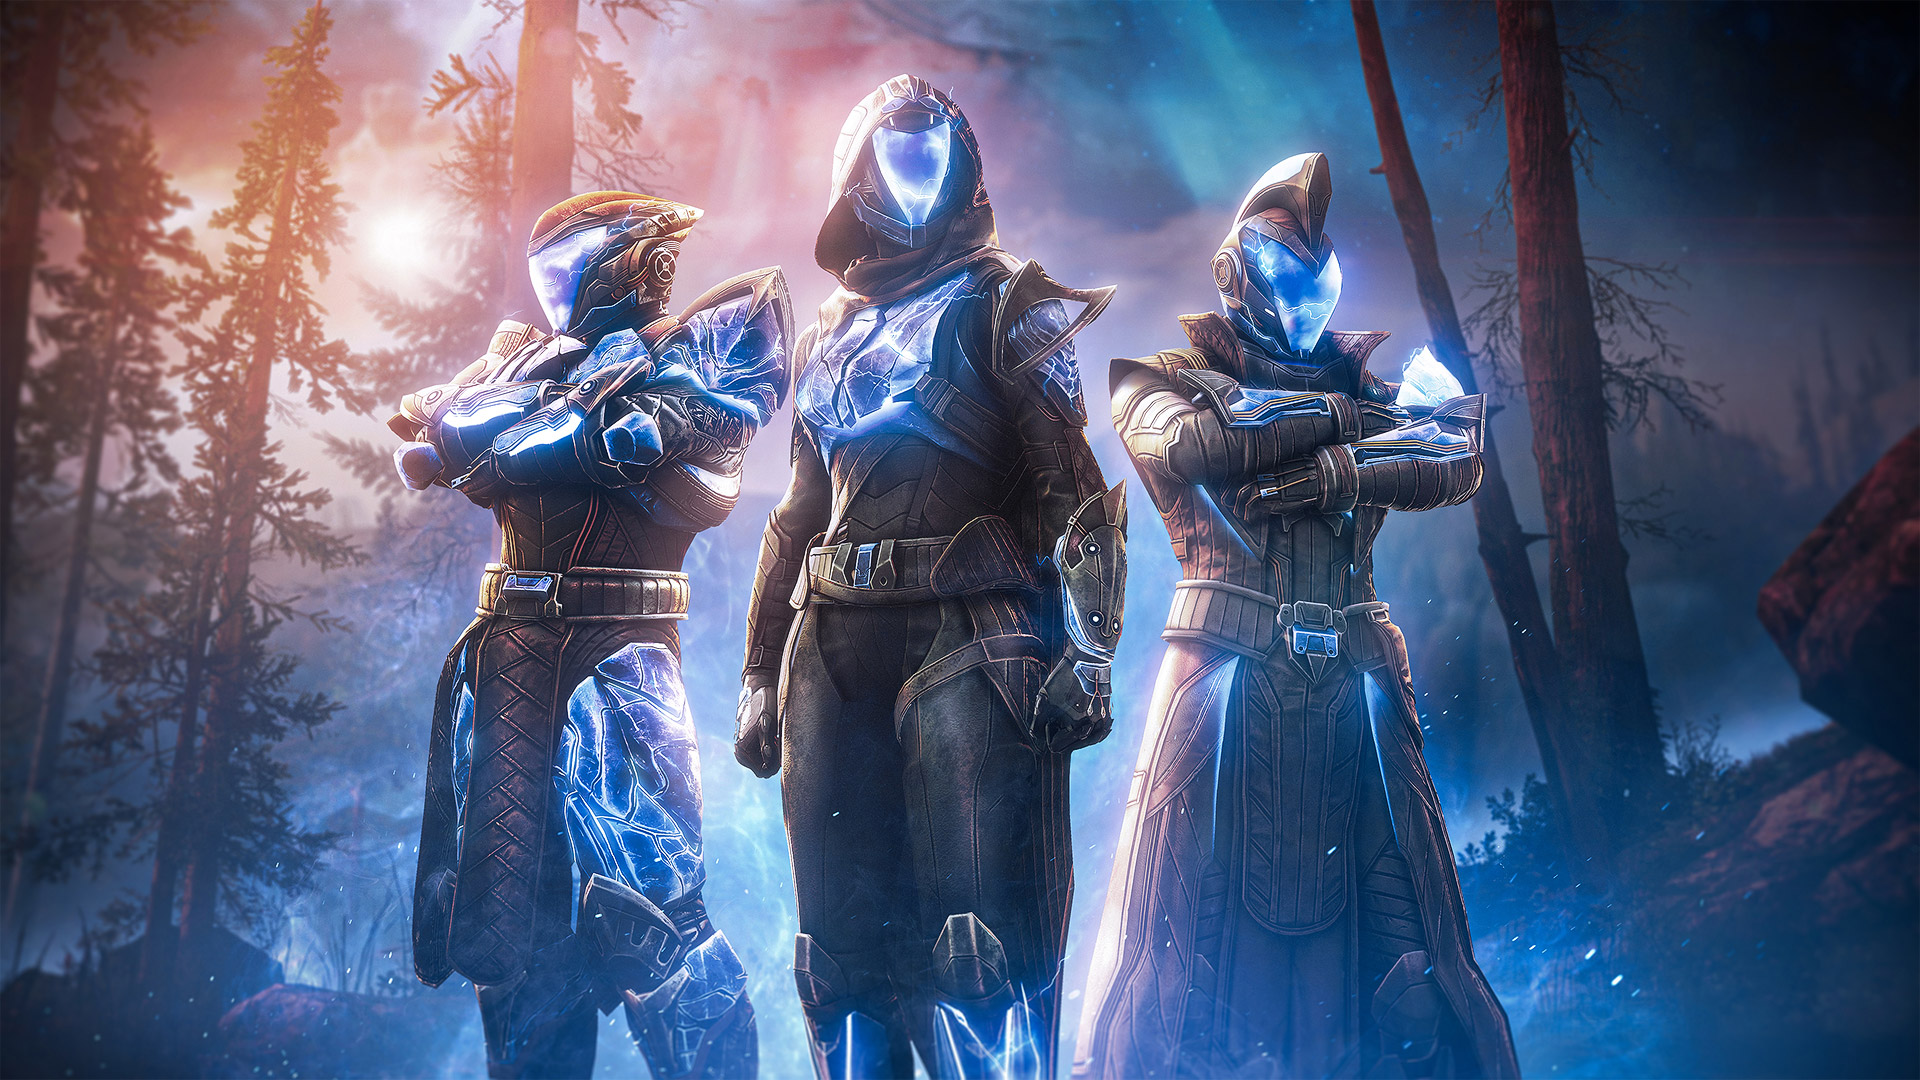  Destiny 2 dataminers admit leaked subscription plan was a hoax: 'We trolled everyone' 